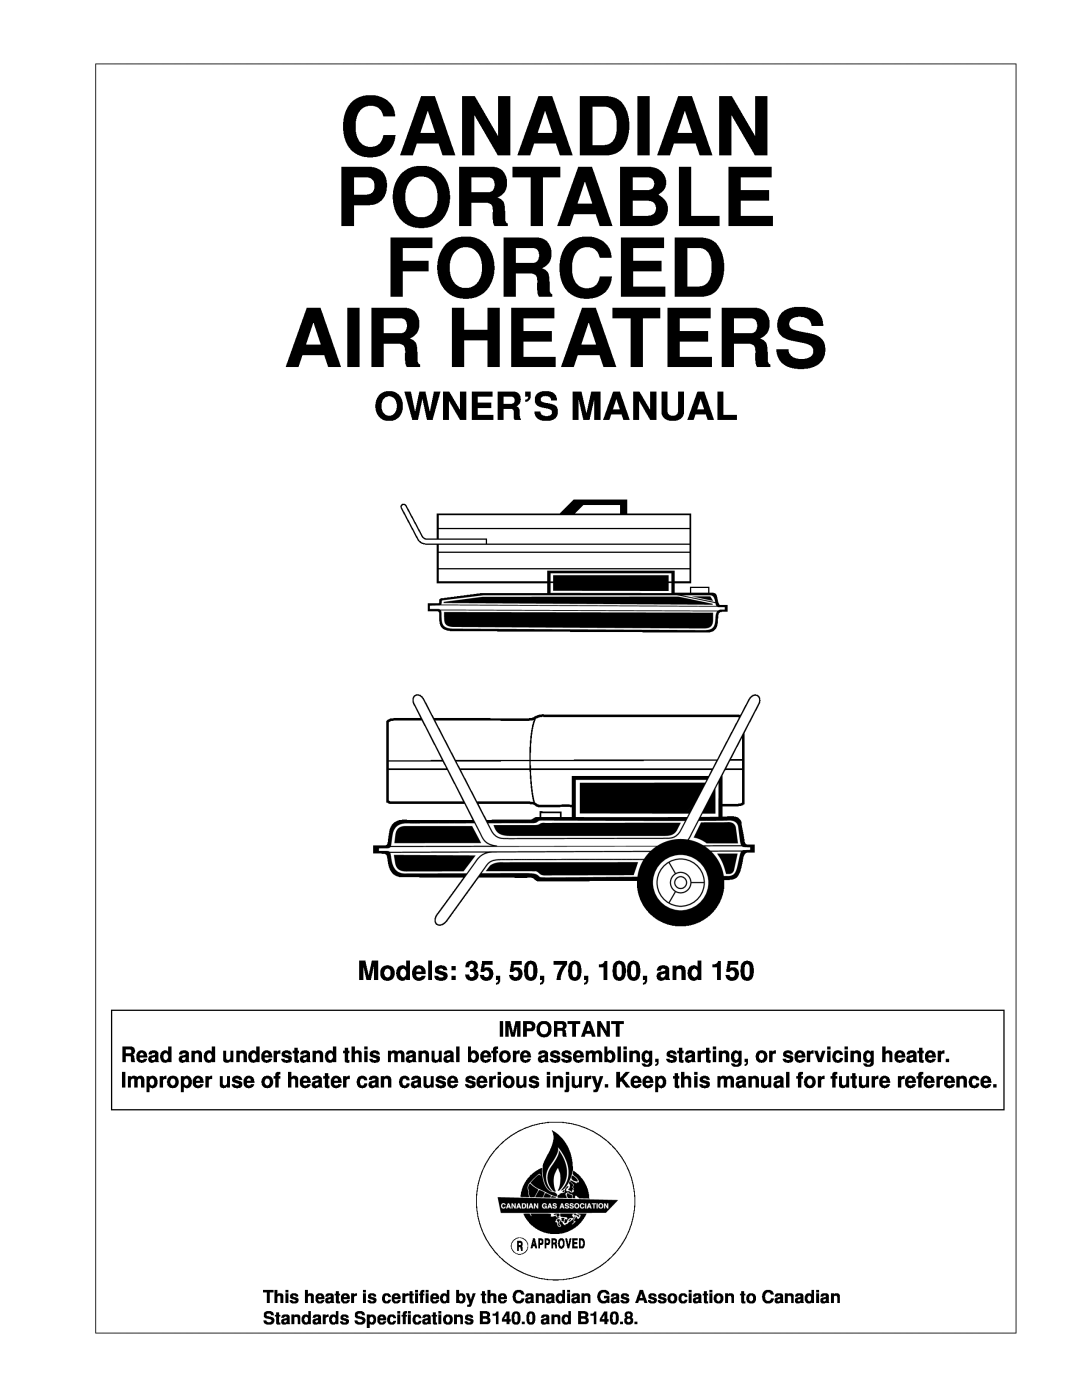 Desa owner manual Models 35, 50, 70, 100, and, Canadian Portable Forced Air Heaters, Side, PFA/PV 010A 